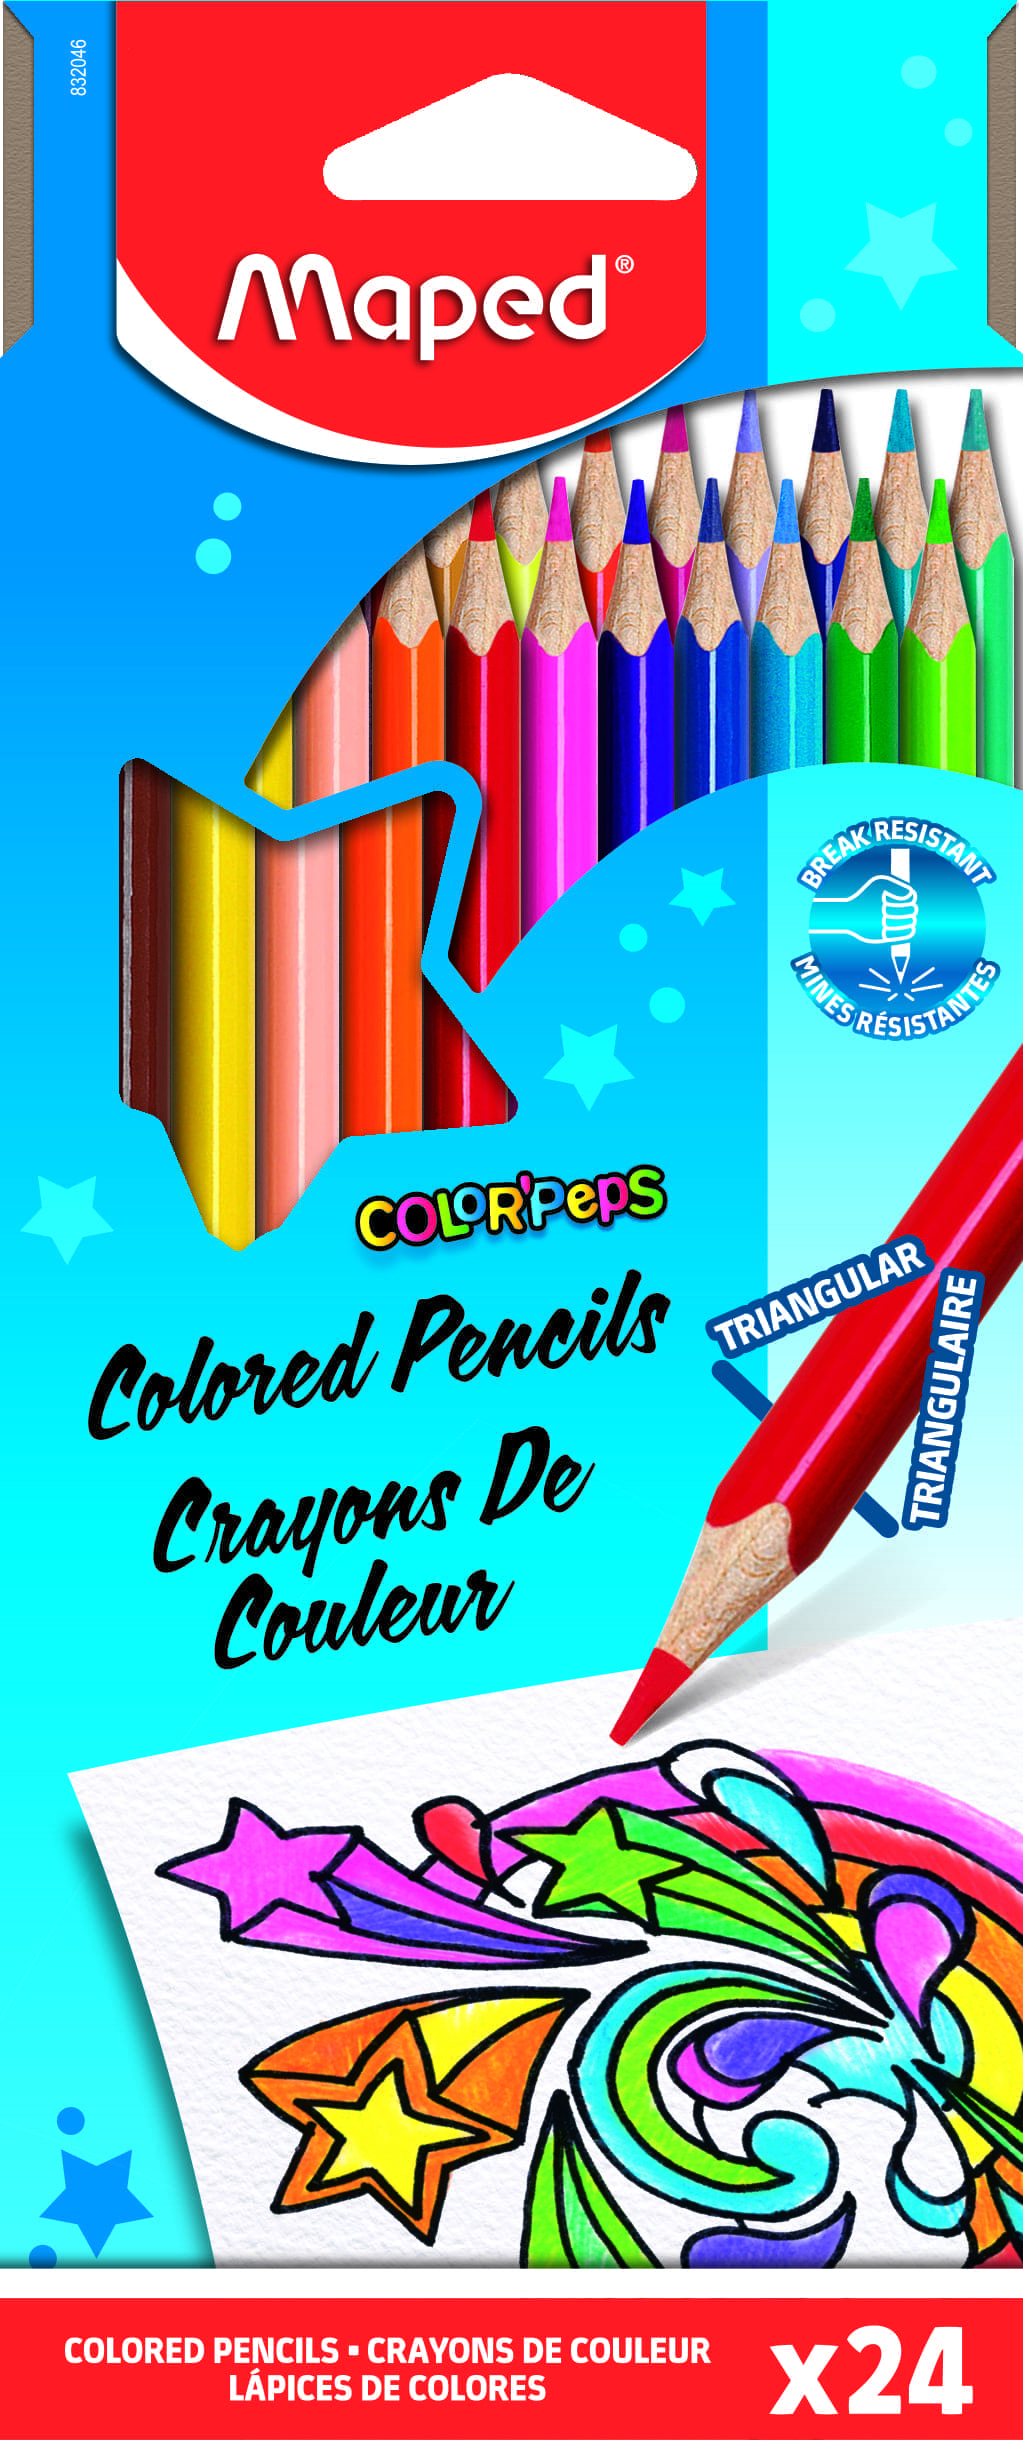 Maped Color'Peps Twist Colouring Crayons (Pack of 24)